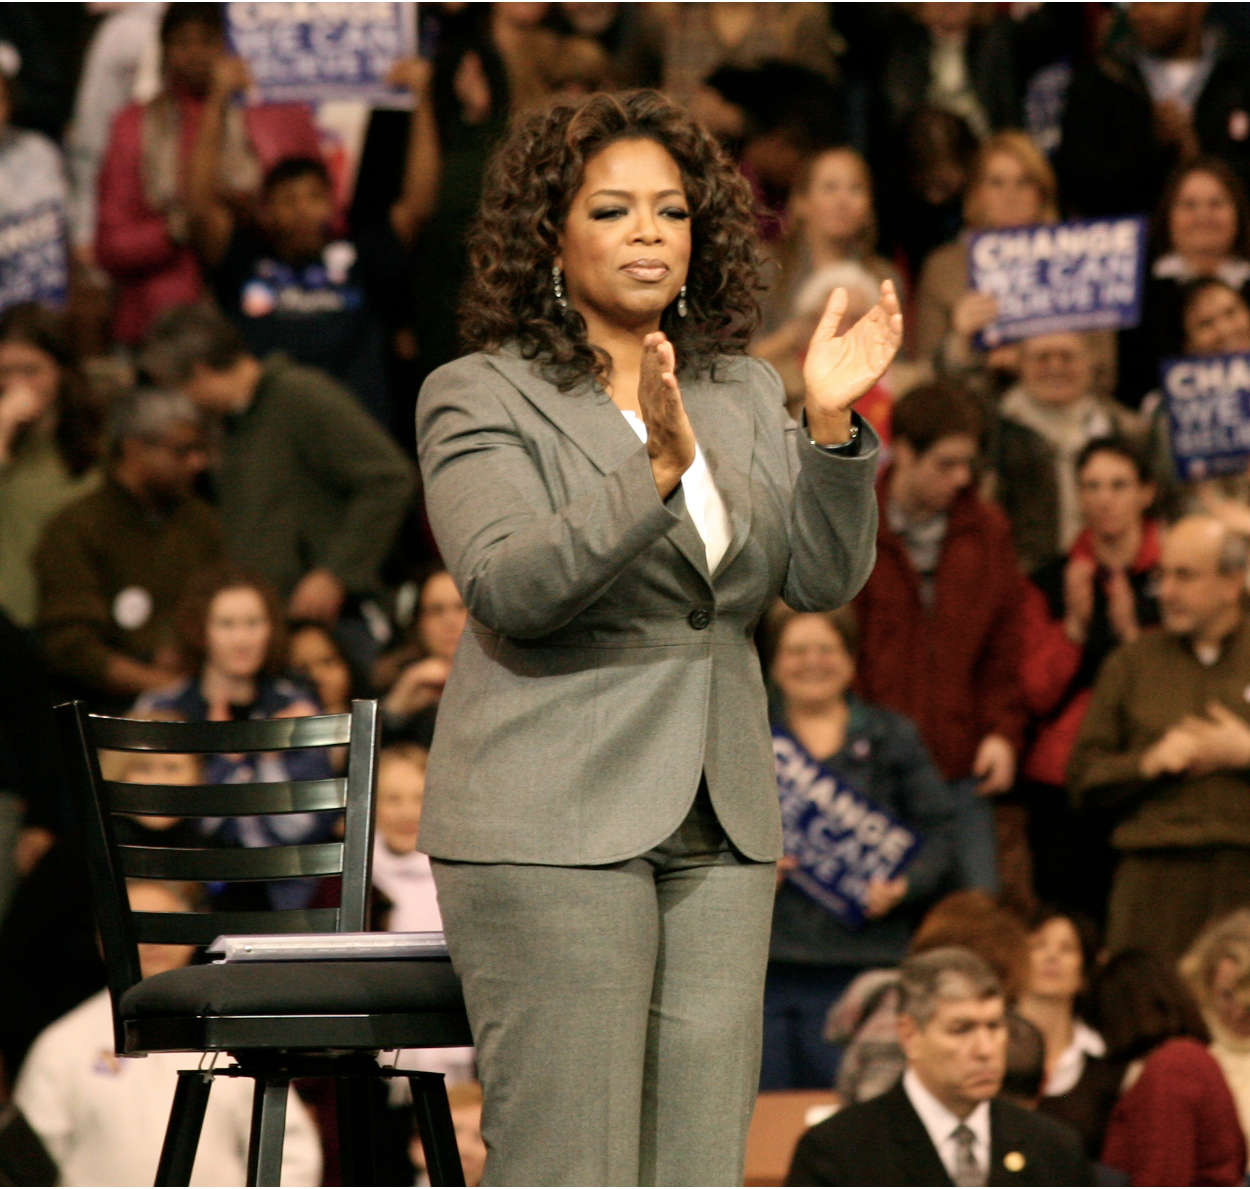 Oprah Winfrey at a rally in 2007. Photo by: vargas2040 (CC BY-SA 2.0)